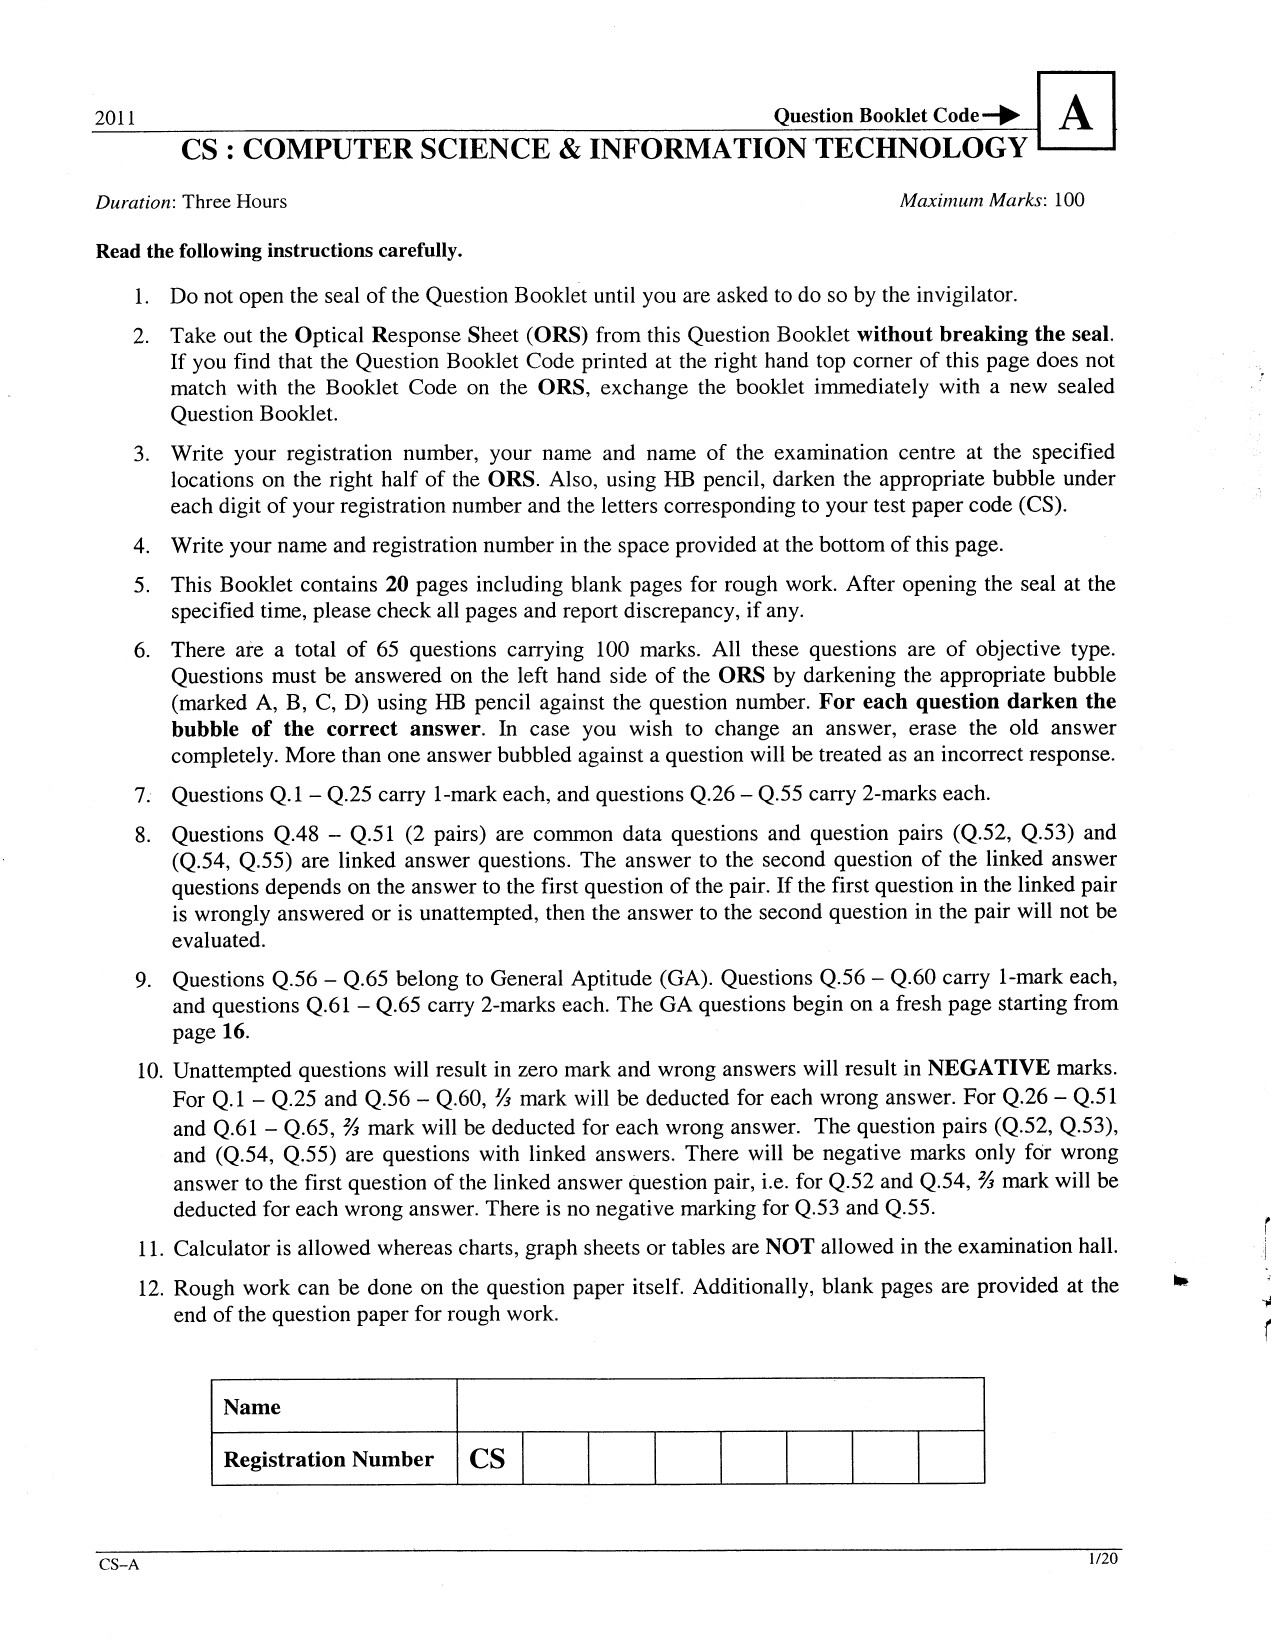 GATE Exam Question Paper 2011 Computer Science and Information Technology 1